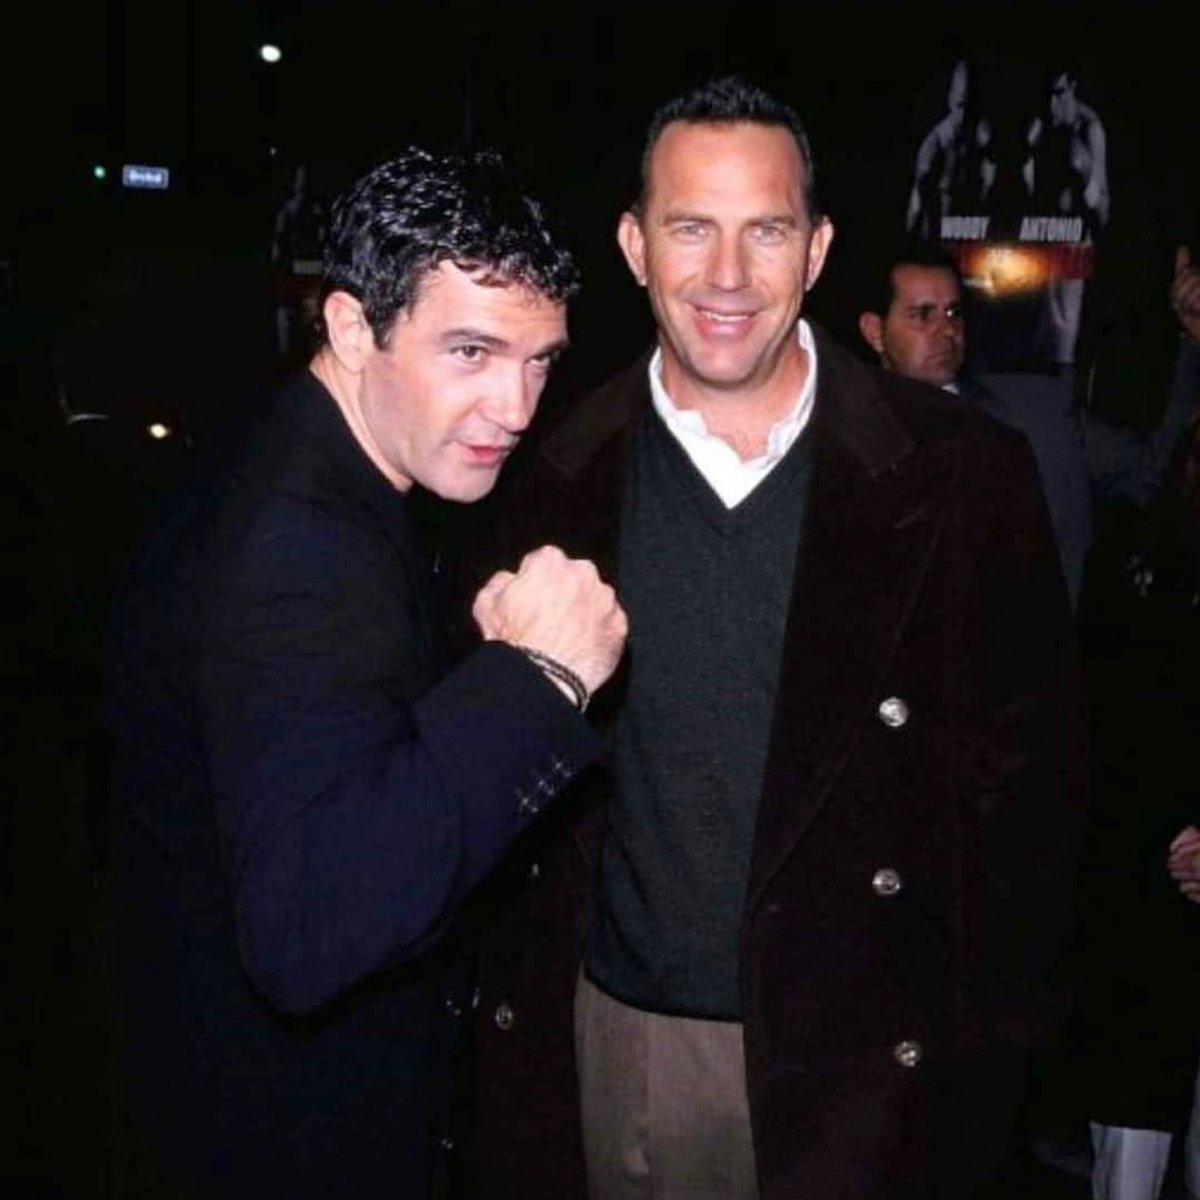 With #KevinCostner at “Play It to the Bone' premiere.

#TBT #Hollywood #WoodyHarrelson #RonShelton